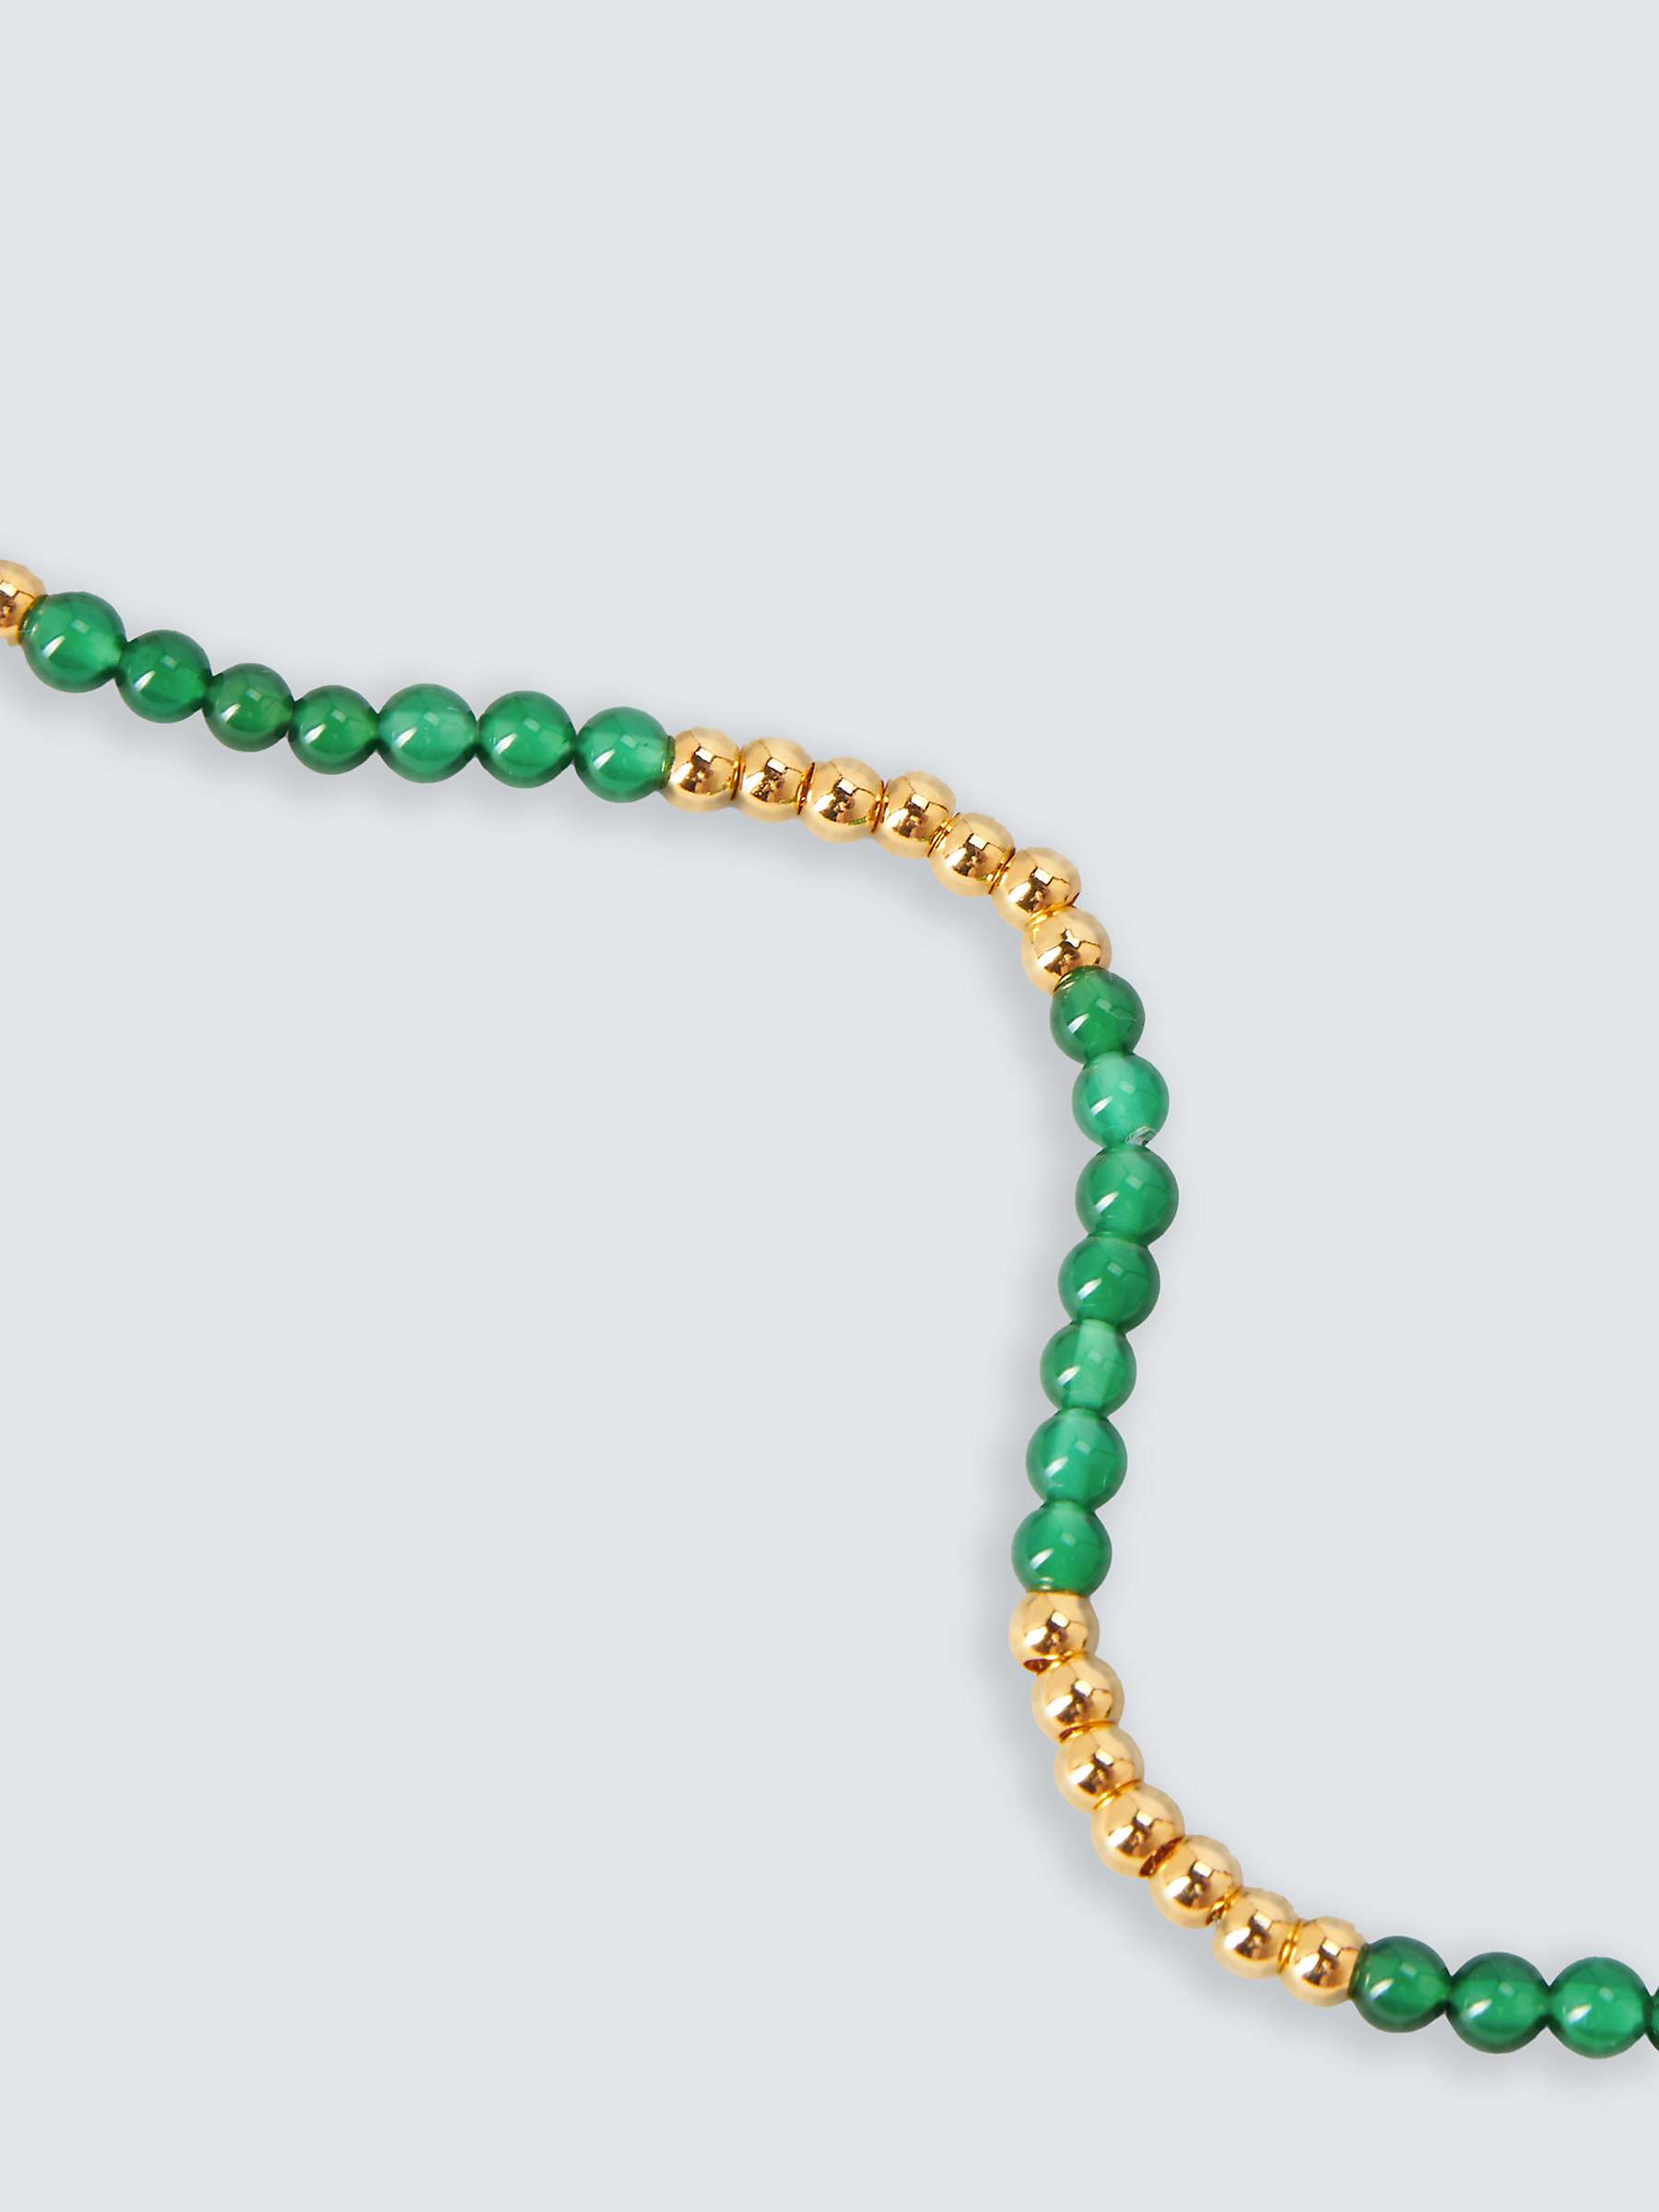 Buy John Lewis Gemstones Agate Beaded Necklace, Yellow Gold/Green Online at johnlewis.com